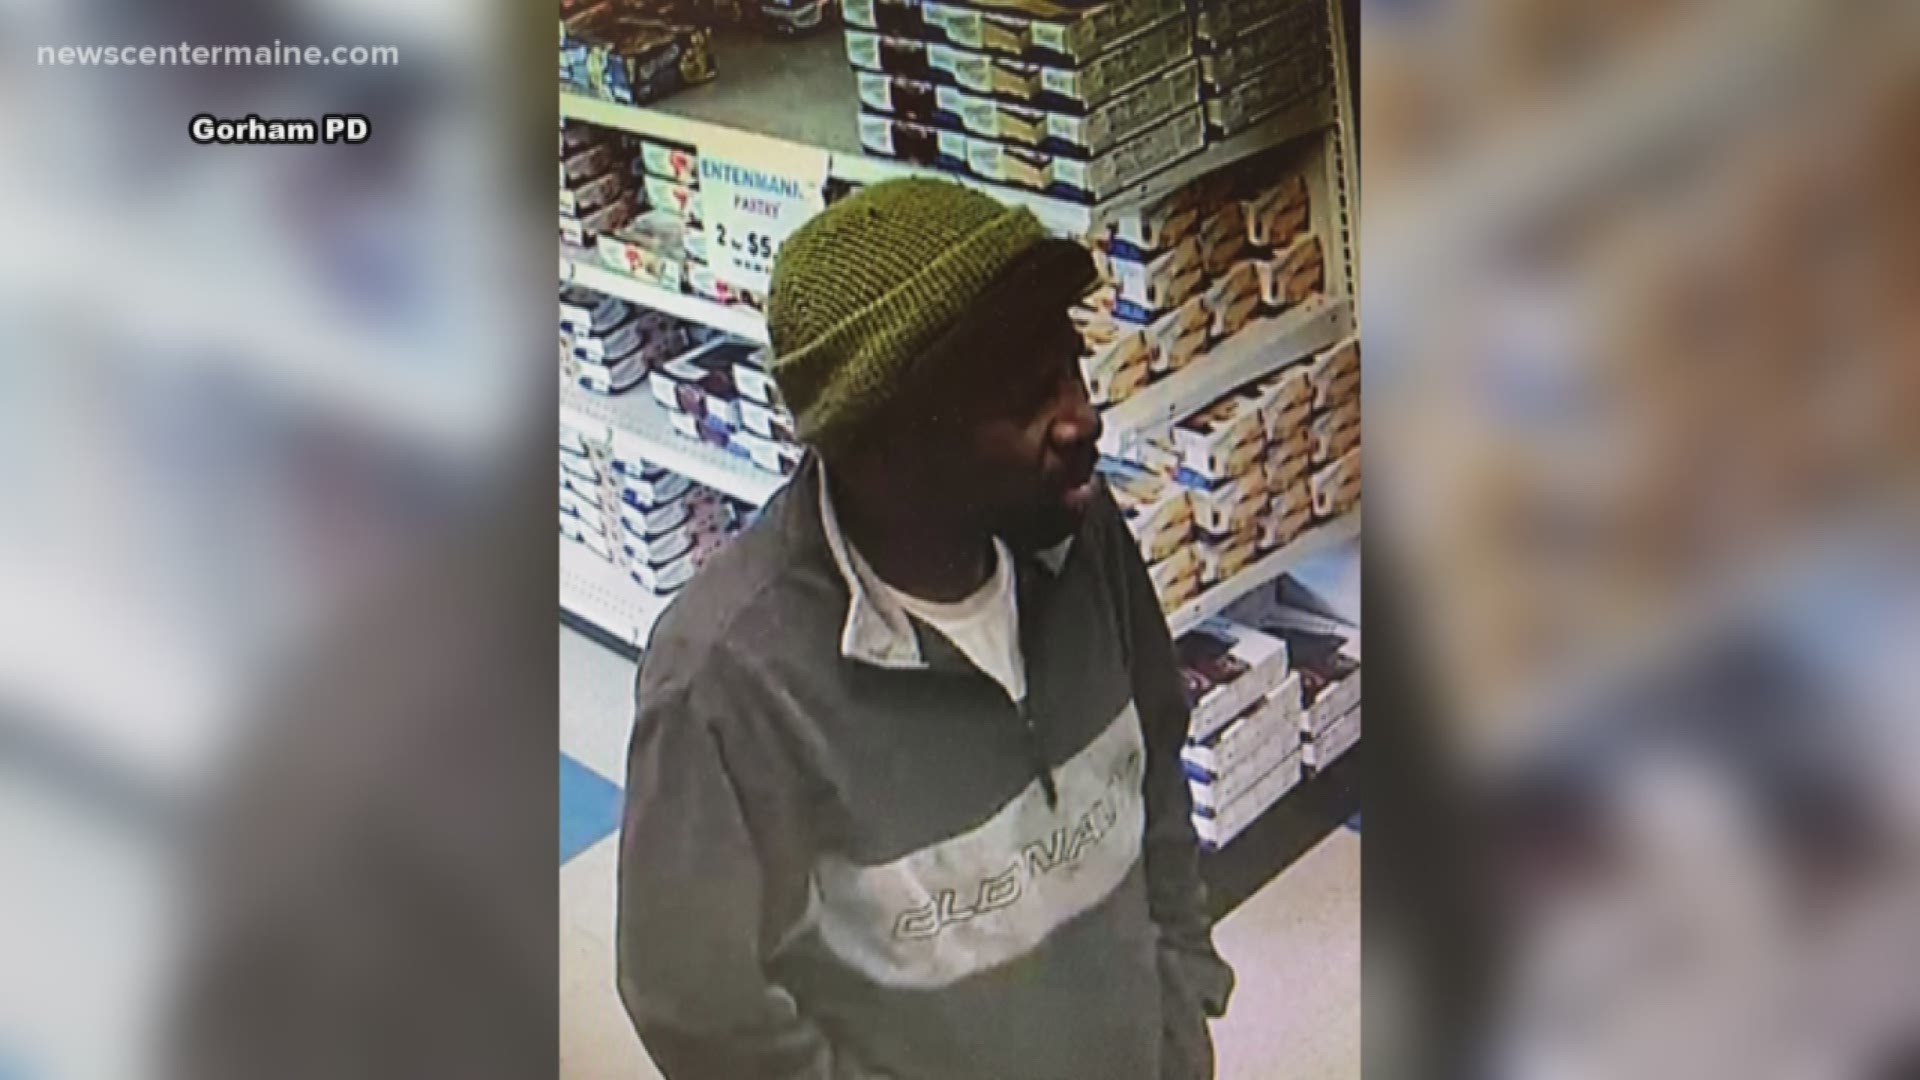 Police ask for information in Gorham bakery robbery